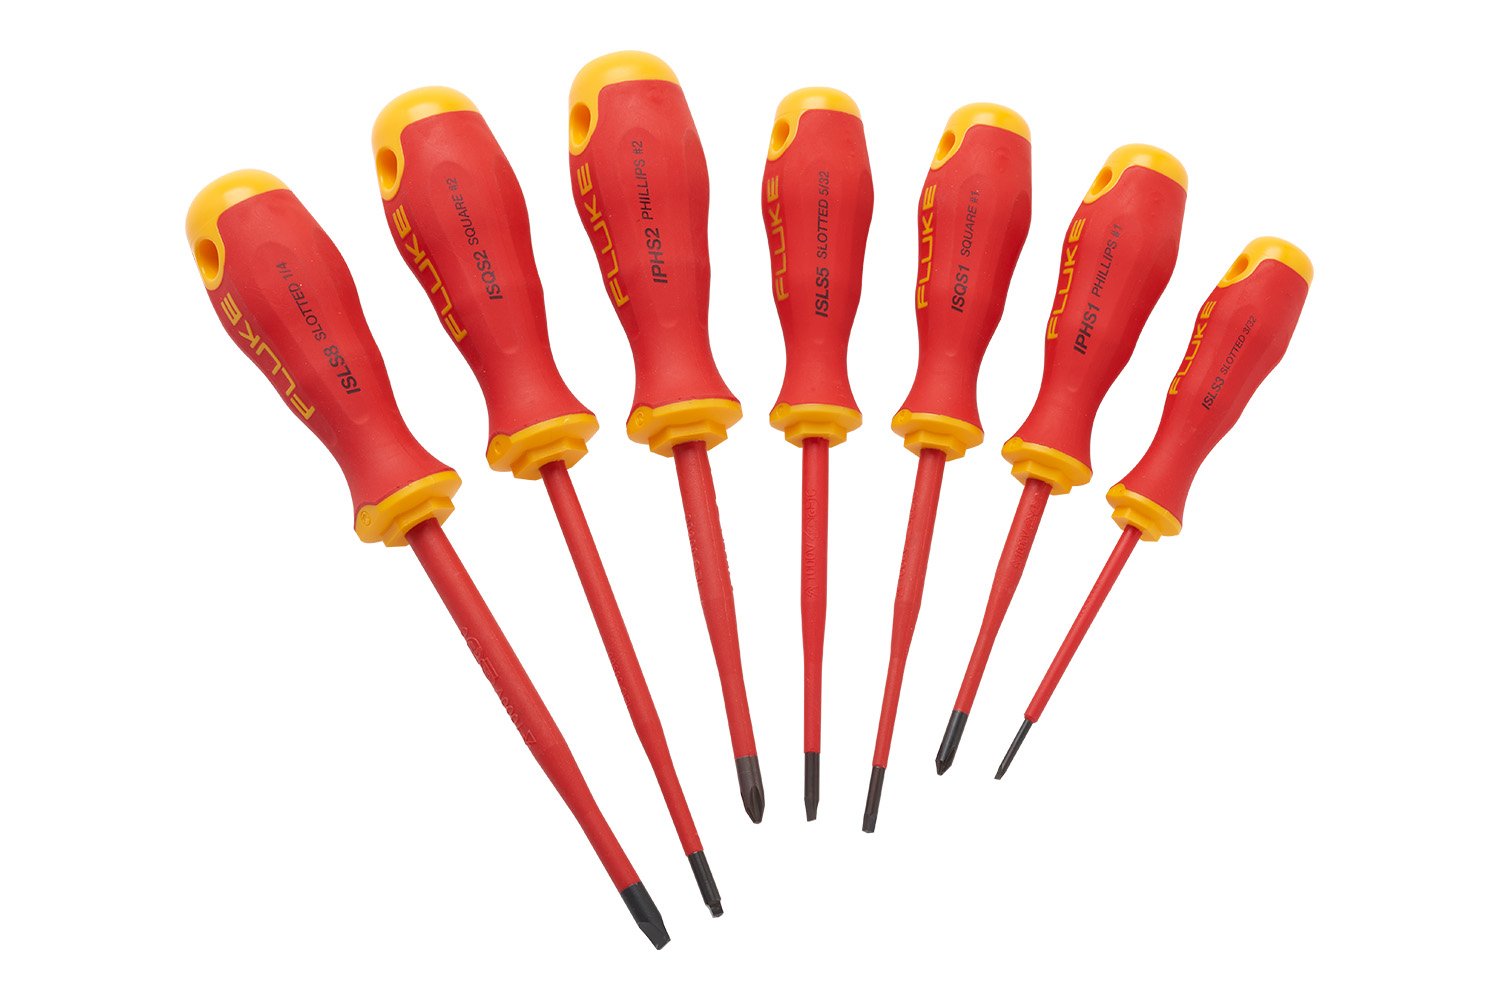 New 7 pc ELECTRICIAN'S INSULATED ELECTRICAL HAND SCREWDRIVER TOOL SET Free Ship